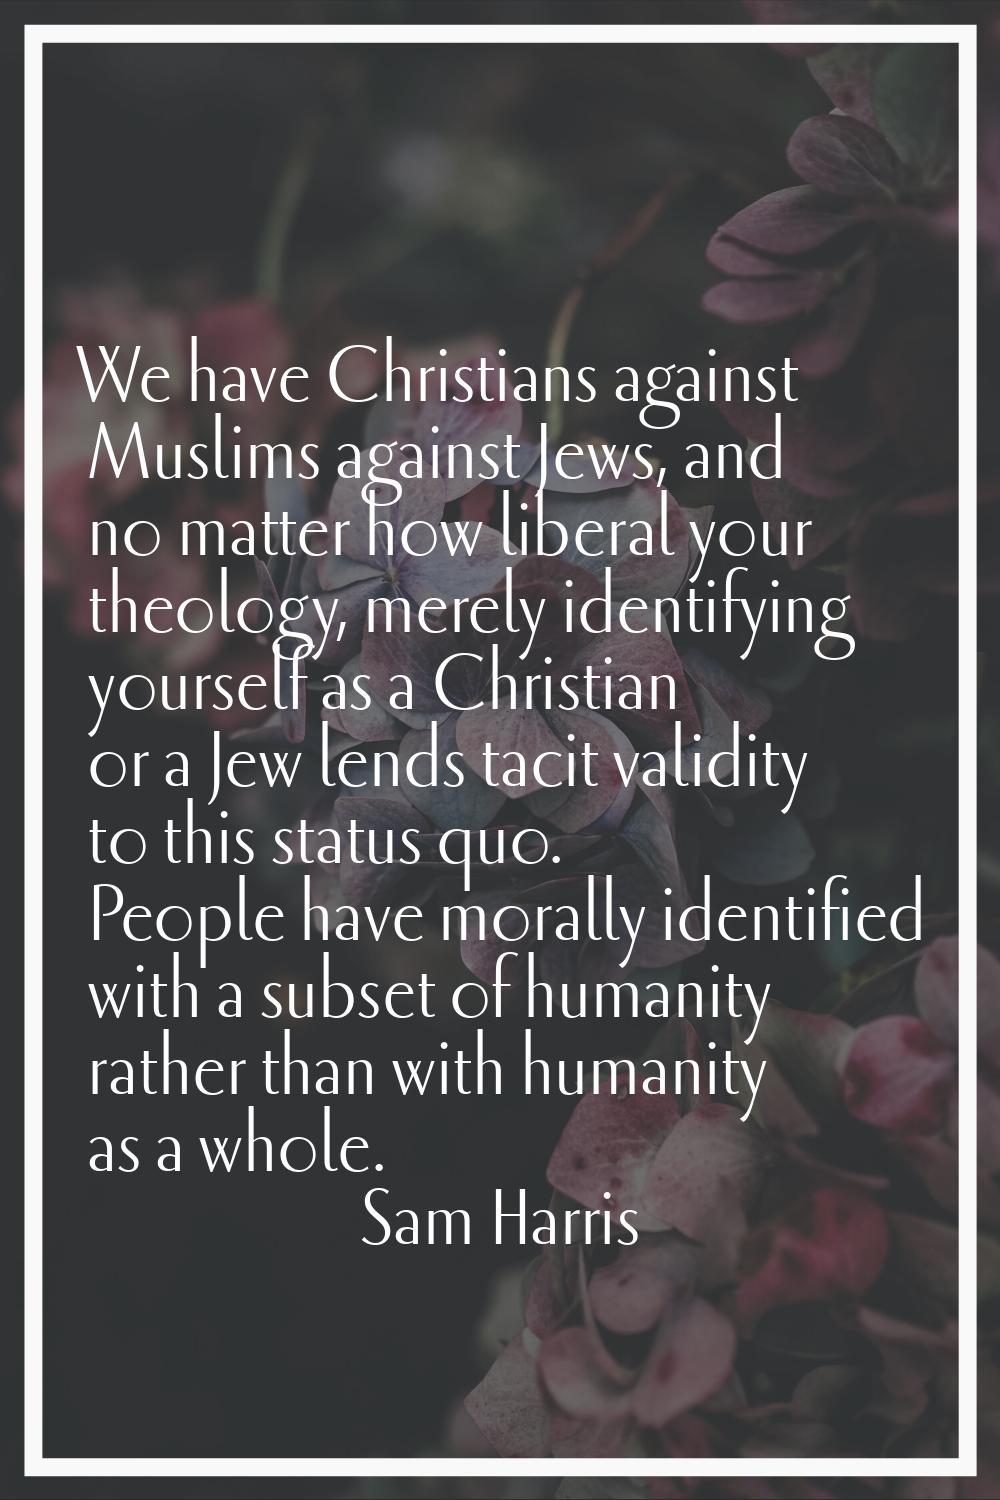 We have Christians against Muslims against Jews, and no matter how liberal your theology, merely id